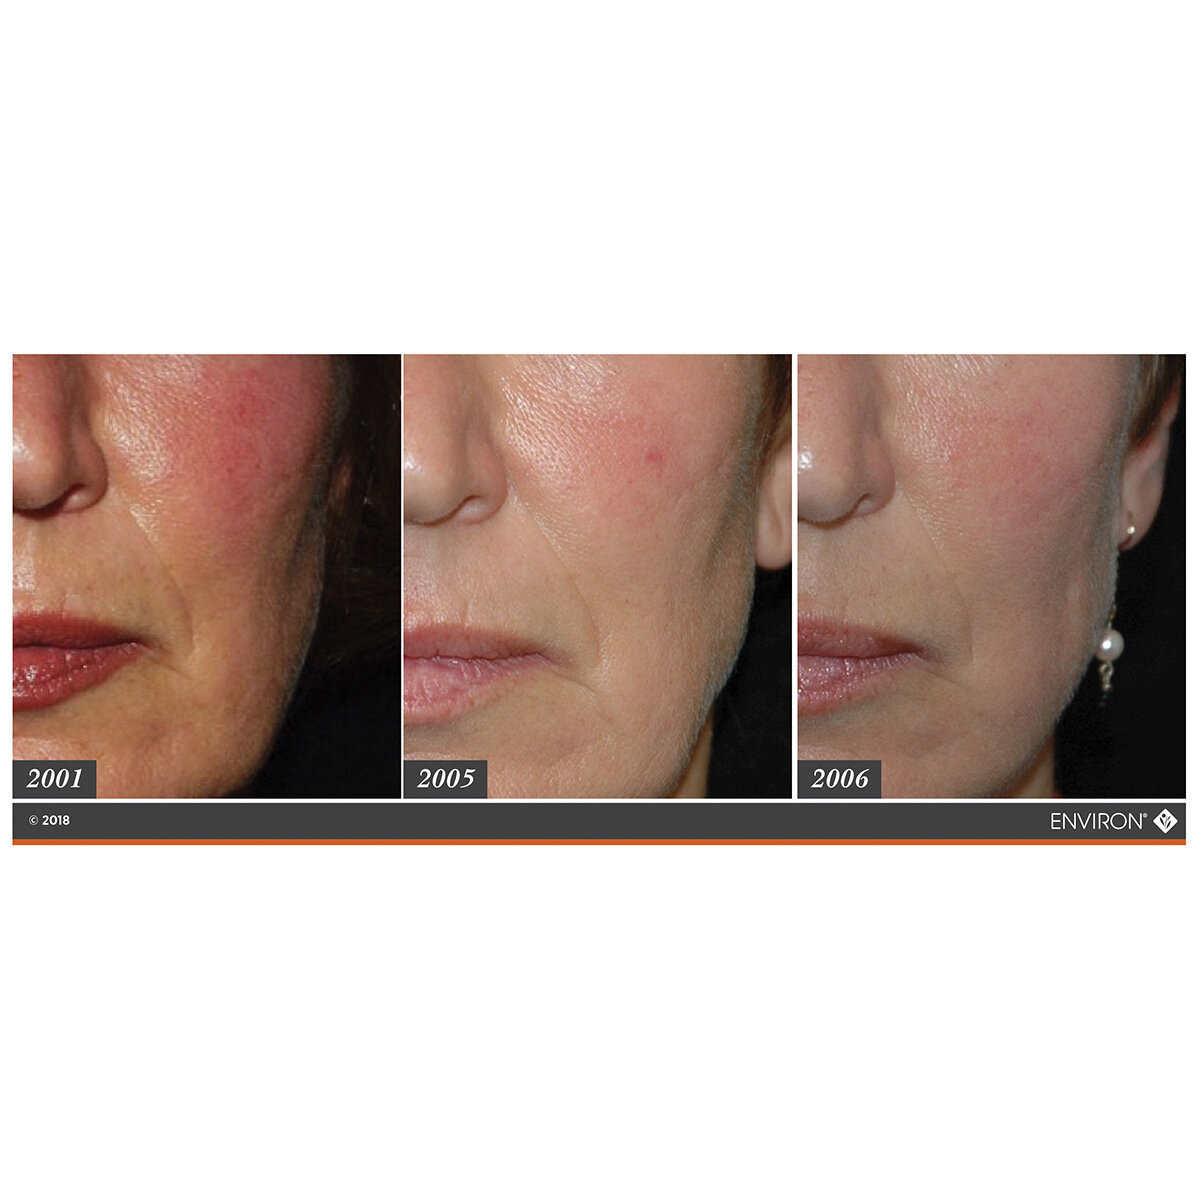 🎉 I love looking over Dr Des's records of his before and after photographs👏
🎉 You can clearly see the improvements in these pics of one of his patients over a period of 5 years using Environ Skin EssentiA Moisturiser morning and night.
🎉 Environ 